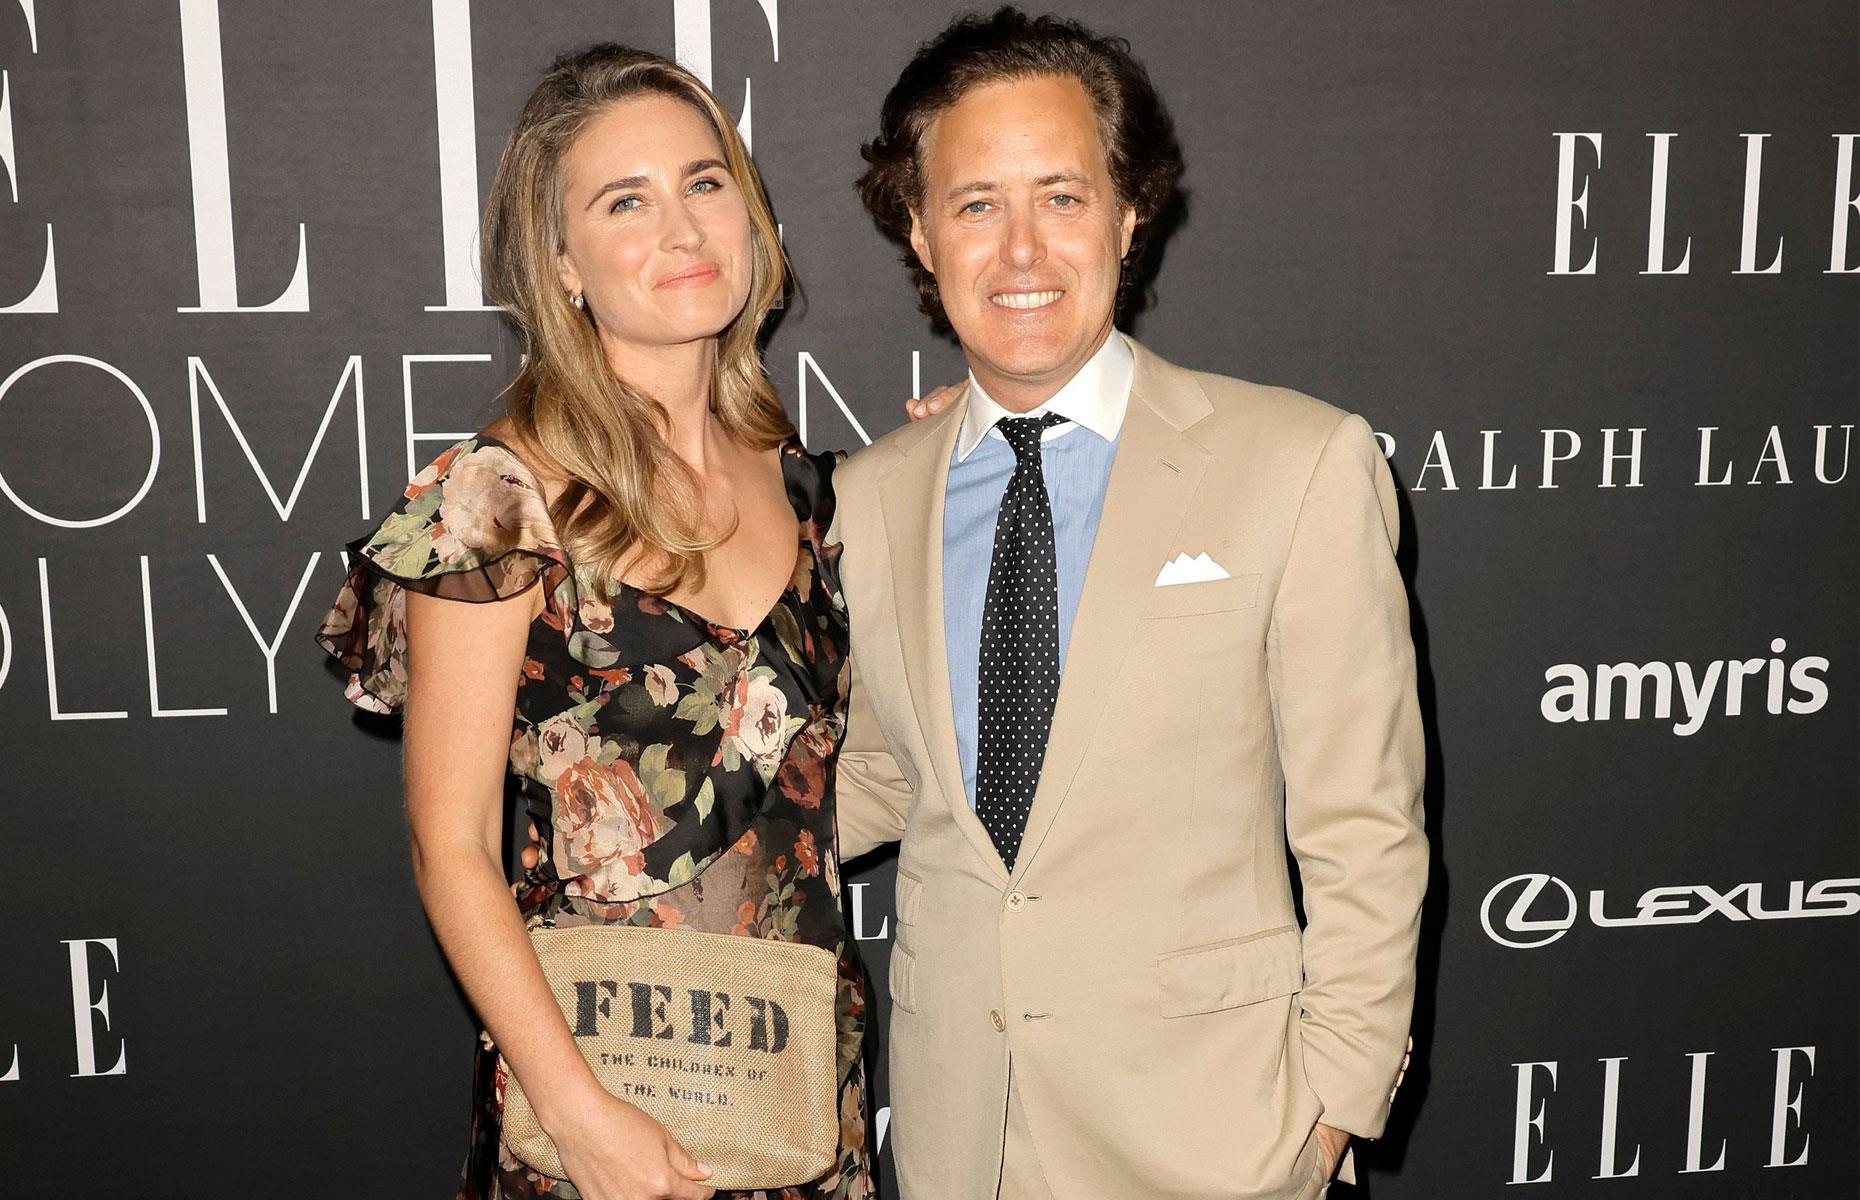 <p>Along with Ellen Gustafson, Lauren Bush Lauren co-founded FEED Projects in 2007. The charitable organization has provided over 126 million school meals for kids in developing countries, with funds raised via the sales of bags, purses, and other accessories.</p>  <p>As for her name, that's explained by the fact that in 2011 Lauren married David Lauren (shown together here), son of the billionaire fashion designer Ralph Lauren. The couple have three children together. </p>  <p>So what's Lauren Bush Lauren worth? Estimates feel relatively modest, with online sources suggesting she has a net worth of up to $5 million.</p>